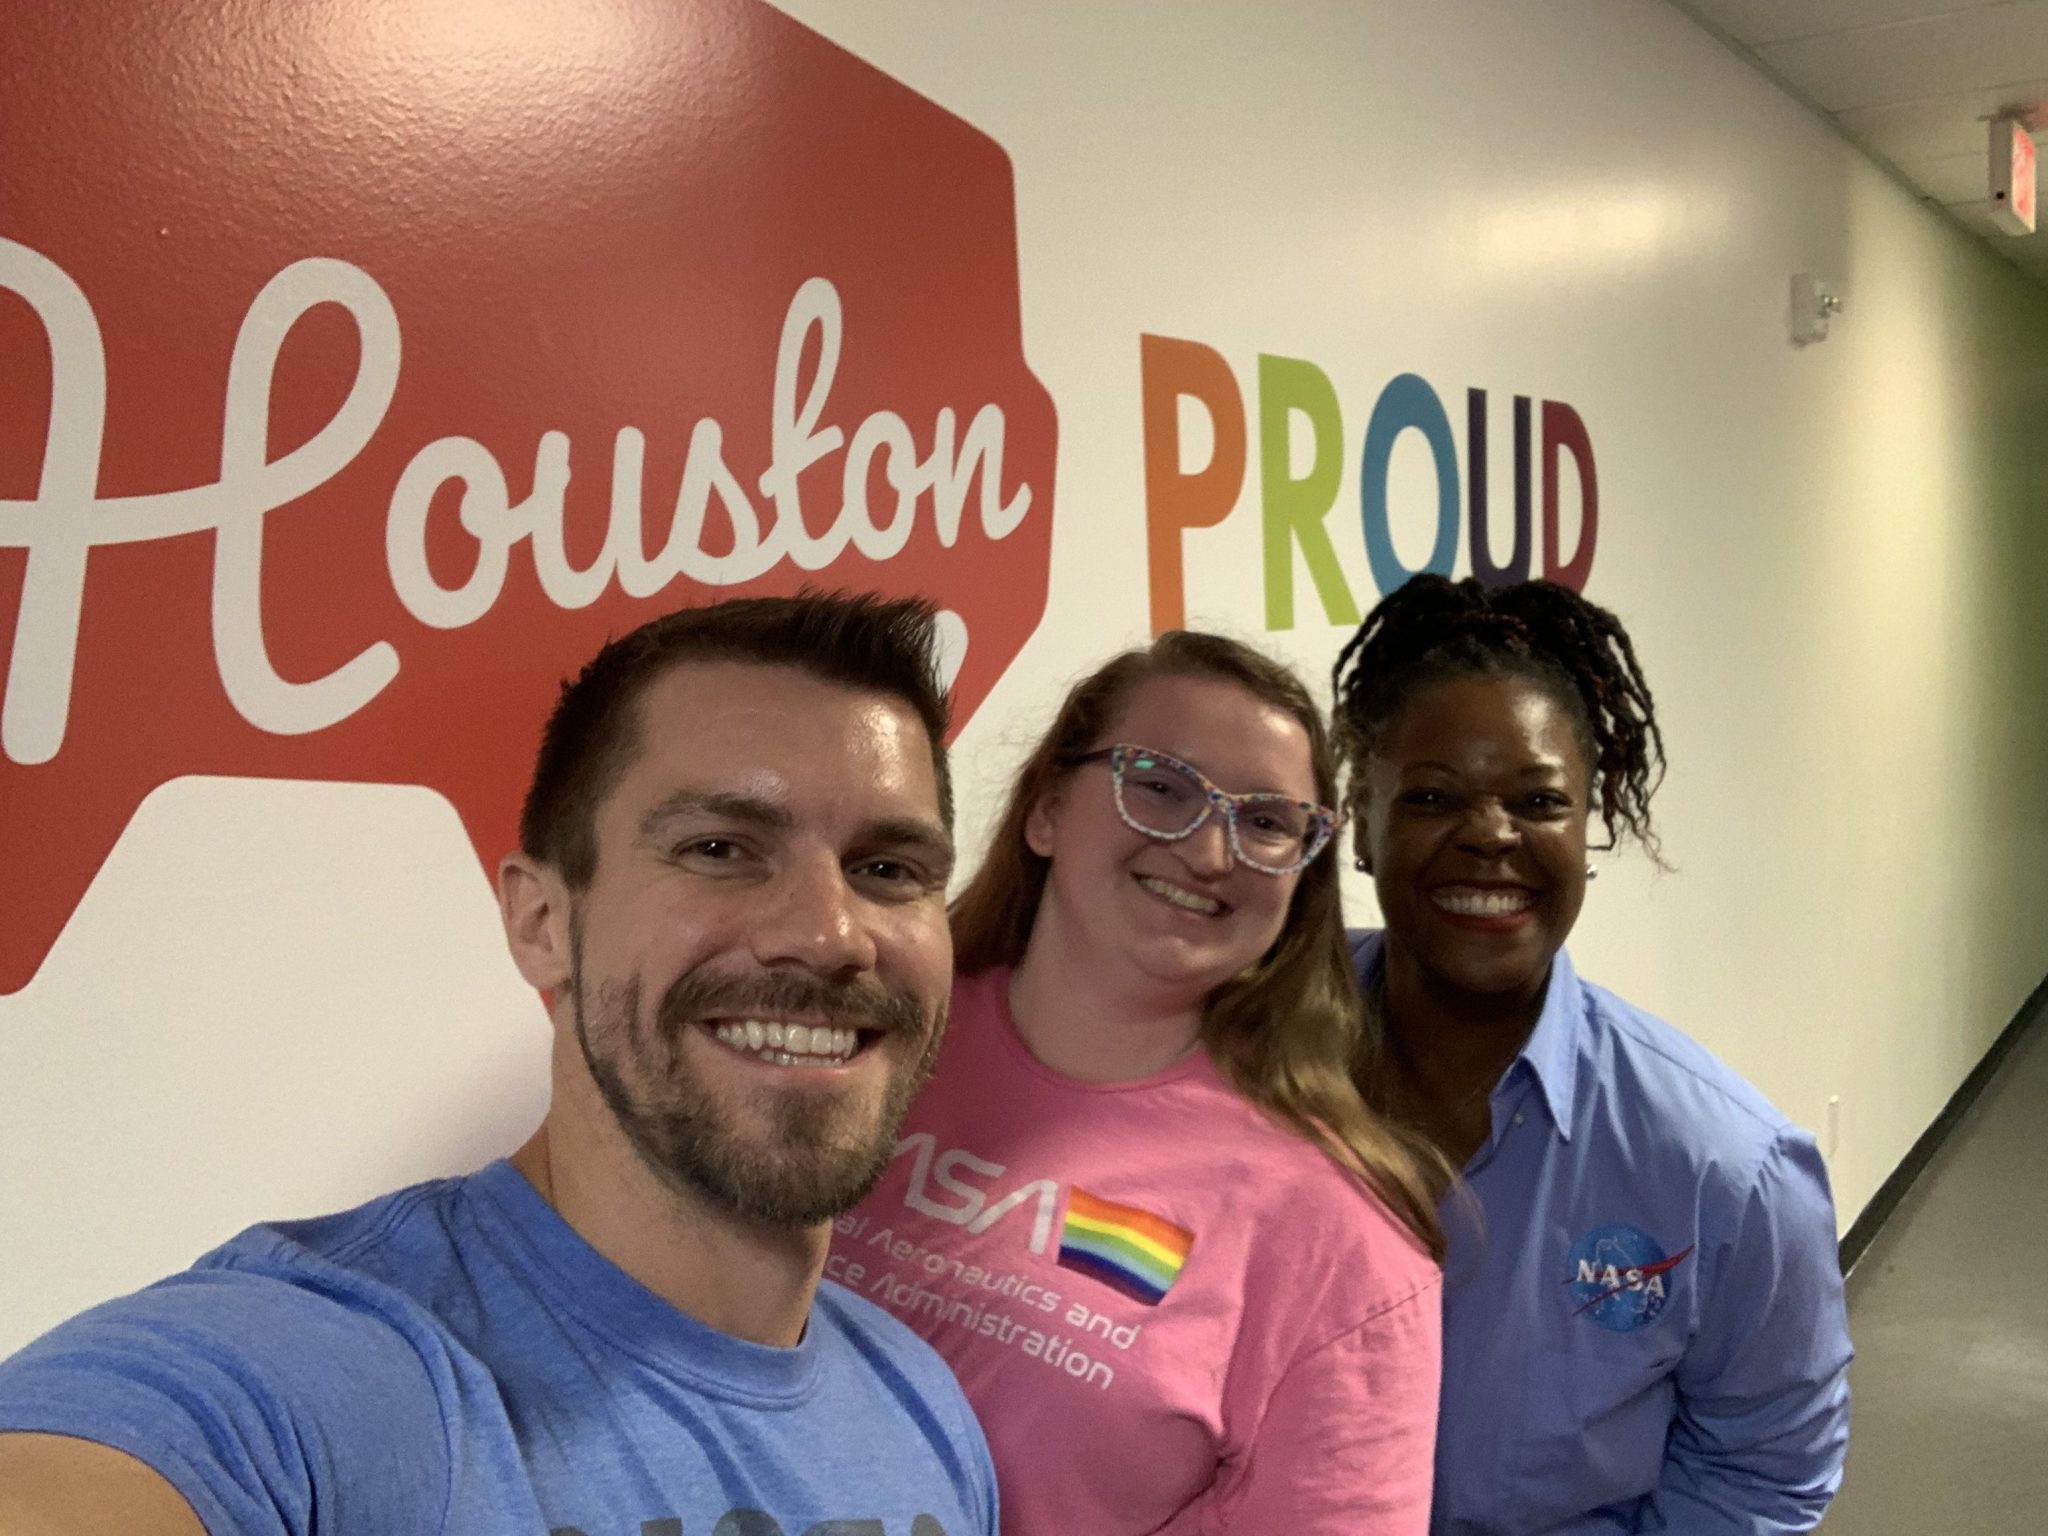 A white man, white woman, and black woman wear NASA shirts while volunteering for a Montrose Center LGBTQI+ event in Houston.